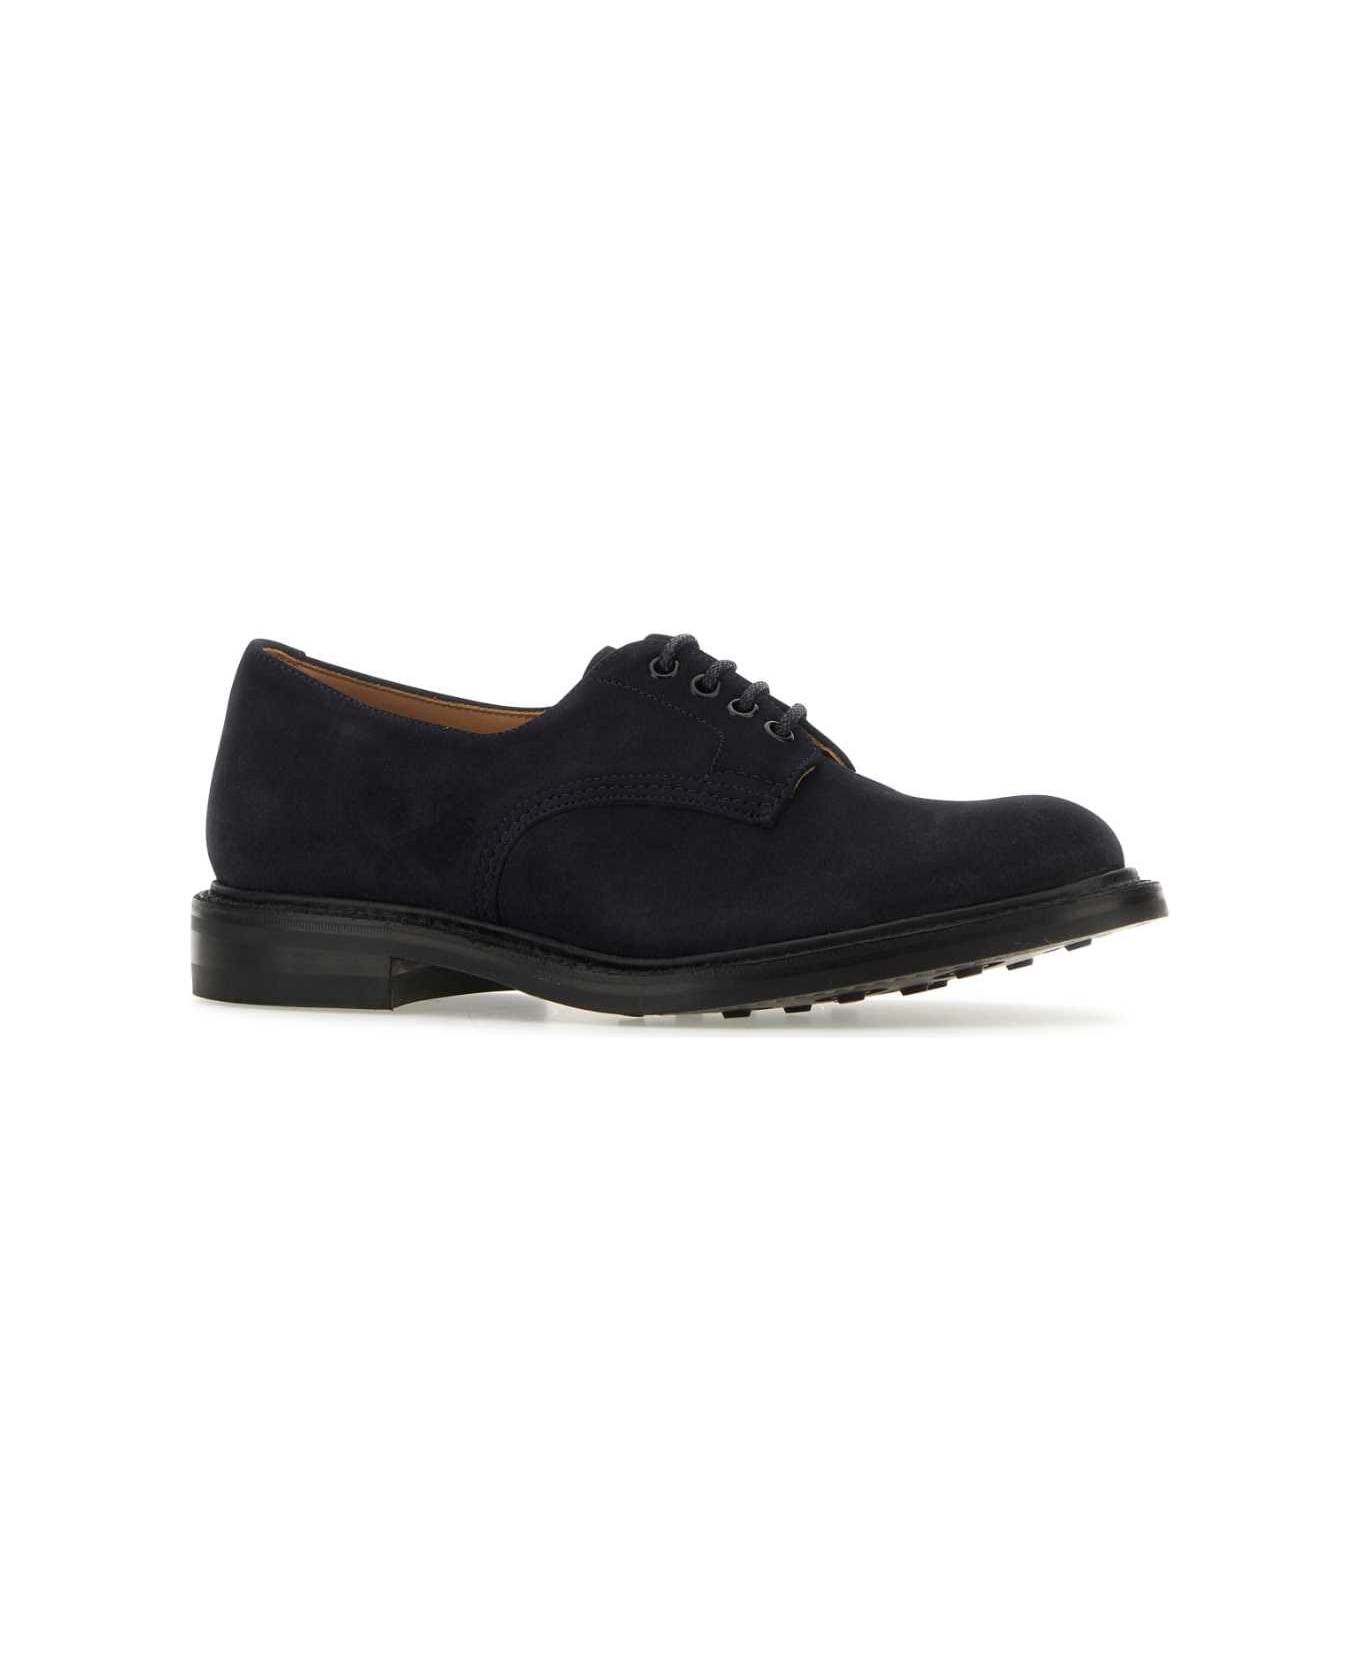 Tricker's Midnight Blue Suede Daniel Lace-up Shoes - NAVY